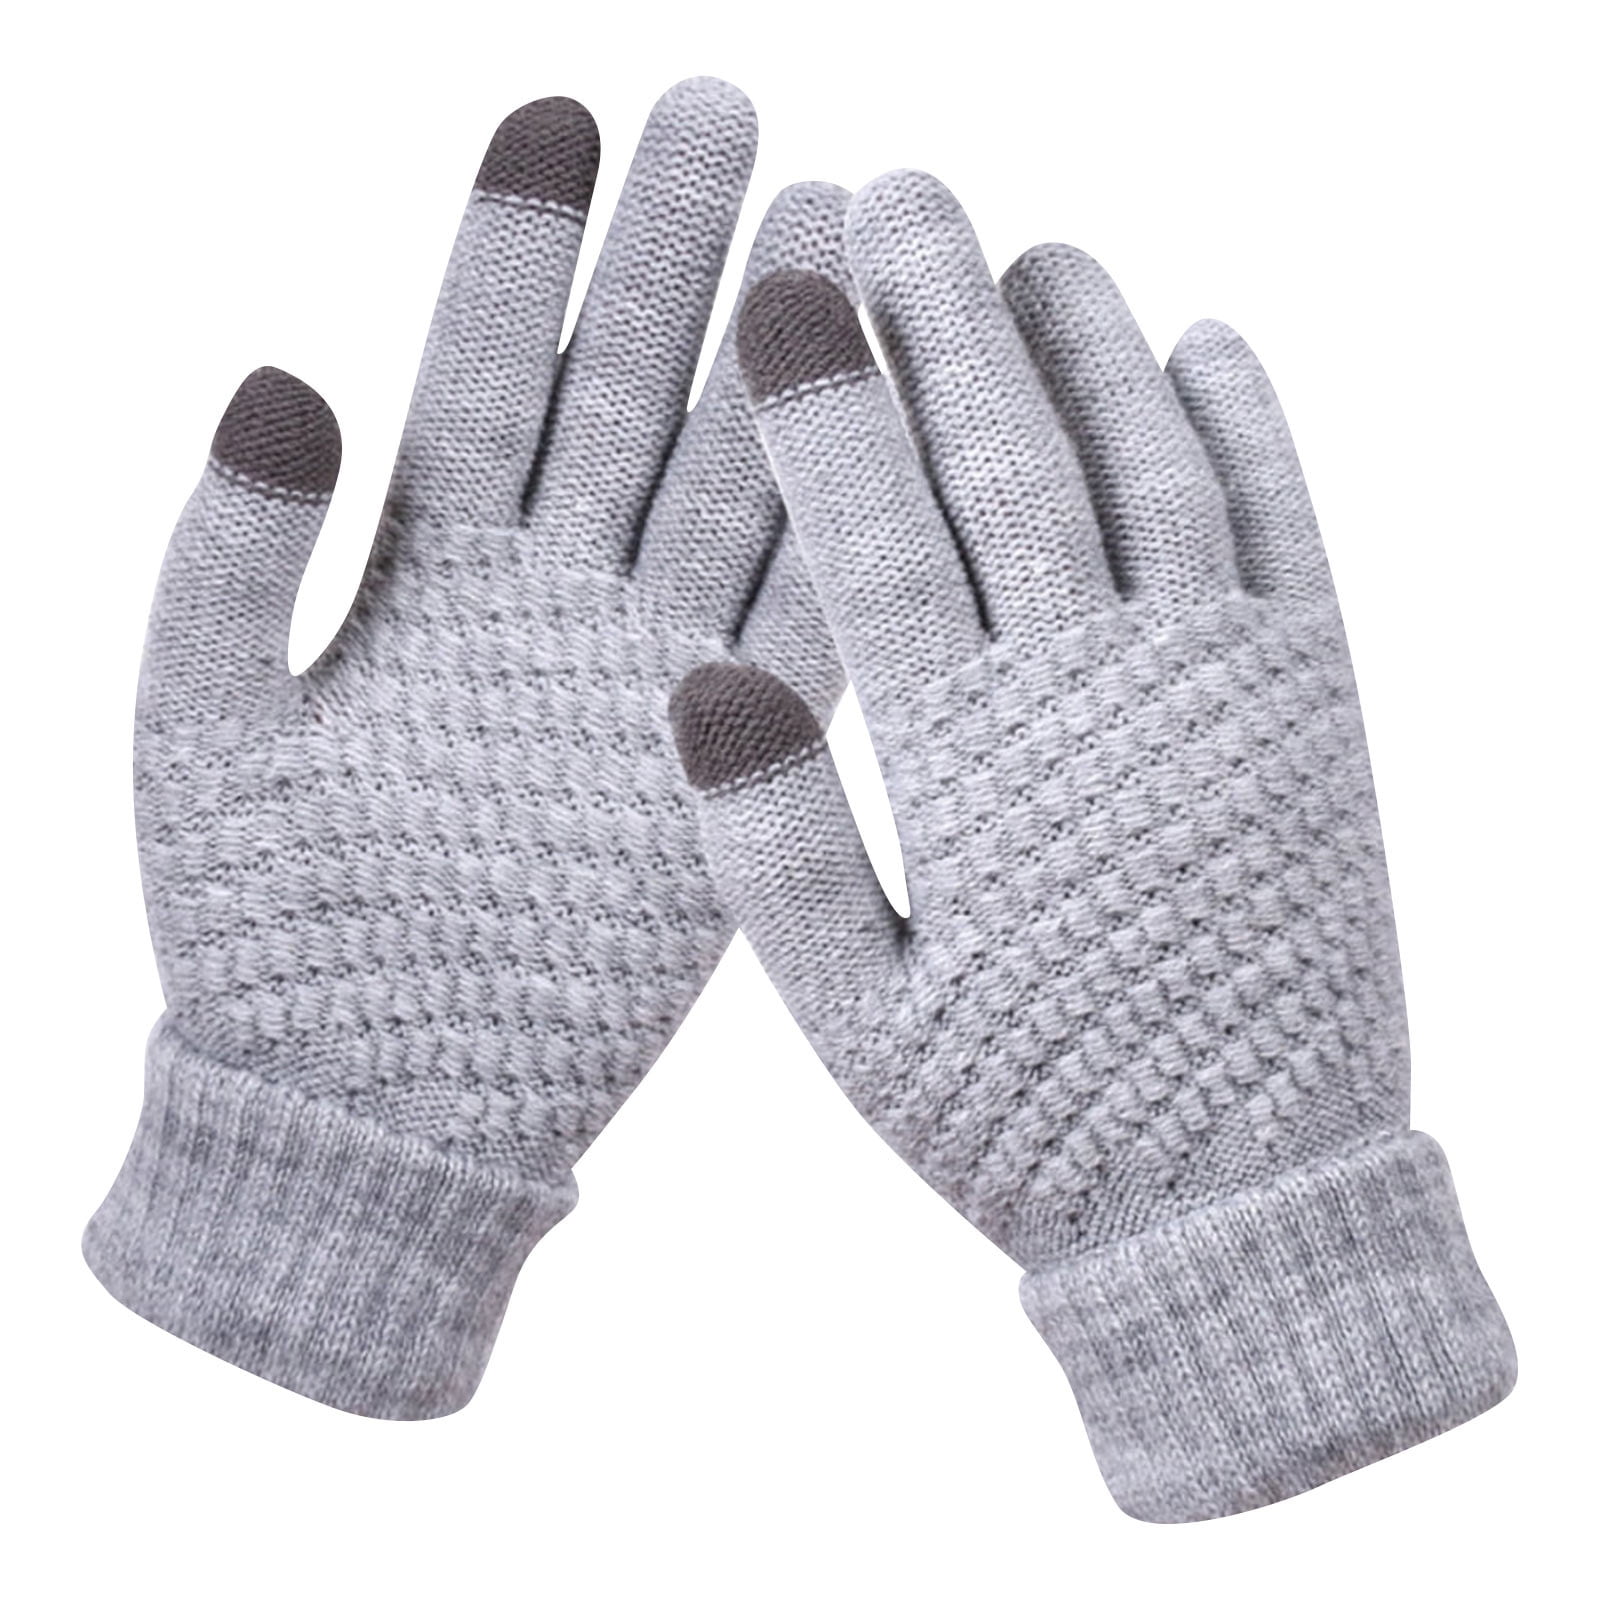 RPVATI Women's Gloves Cold Weather Knitted Gloves Warm Winter Cycling ...